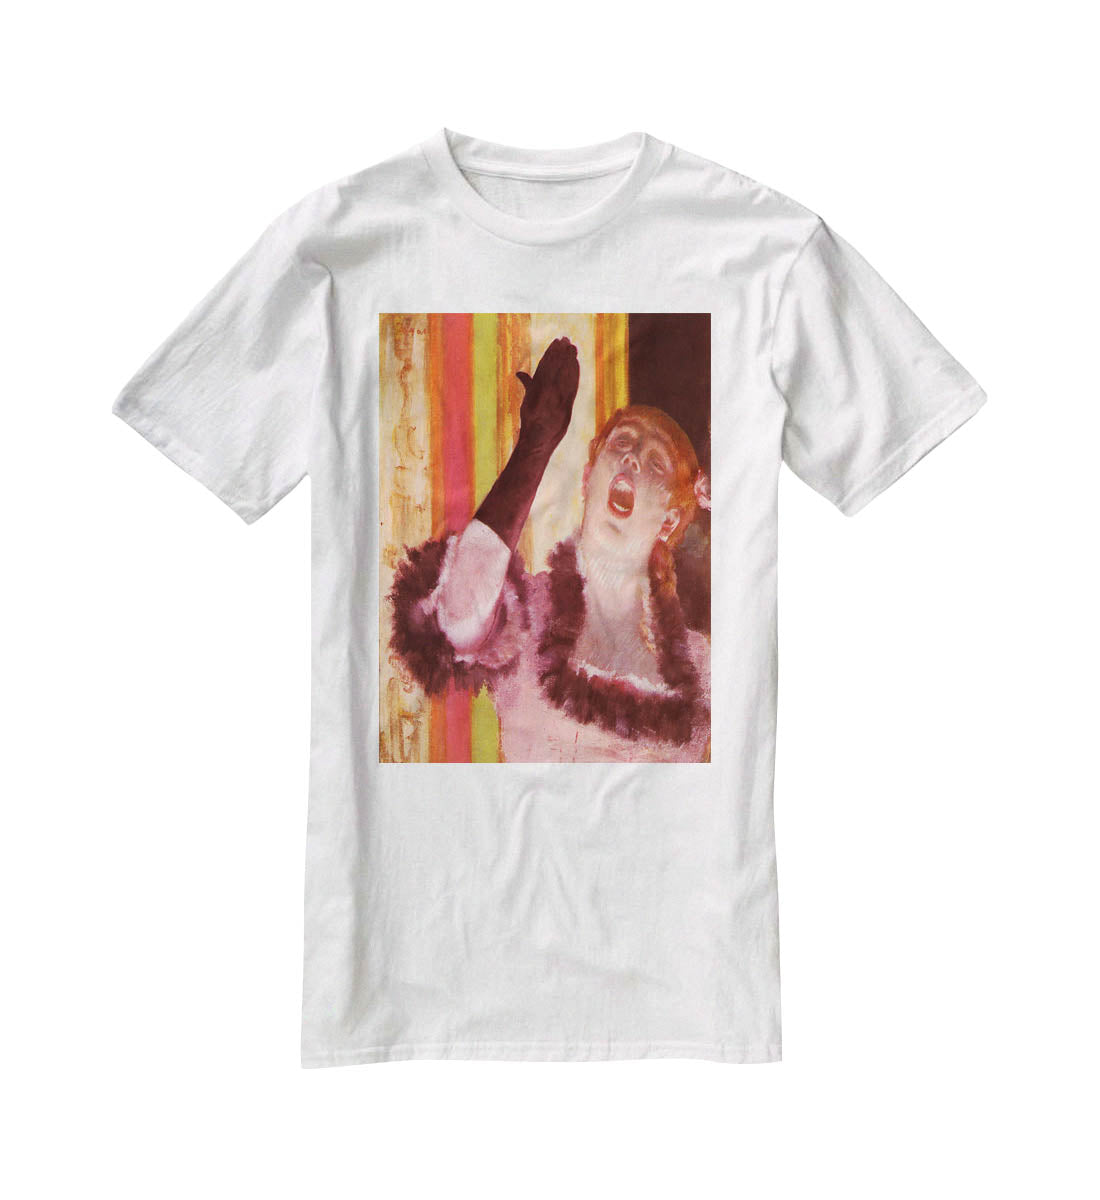 The singer with the glove by Degas T-Shirt - Canvas Art Rocks - 5